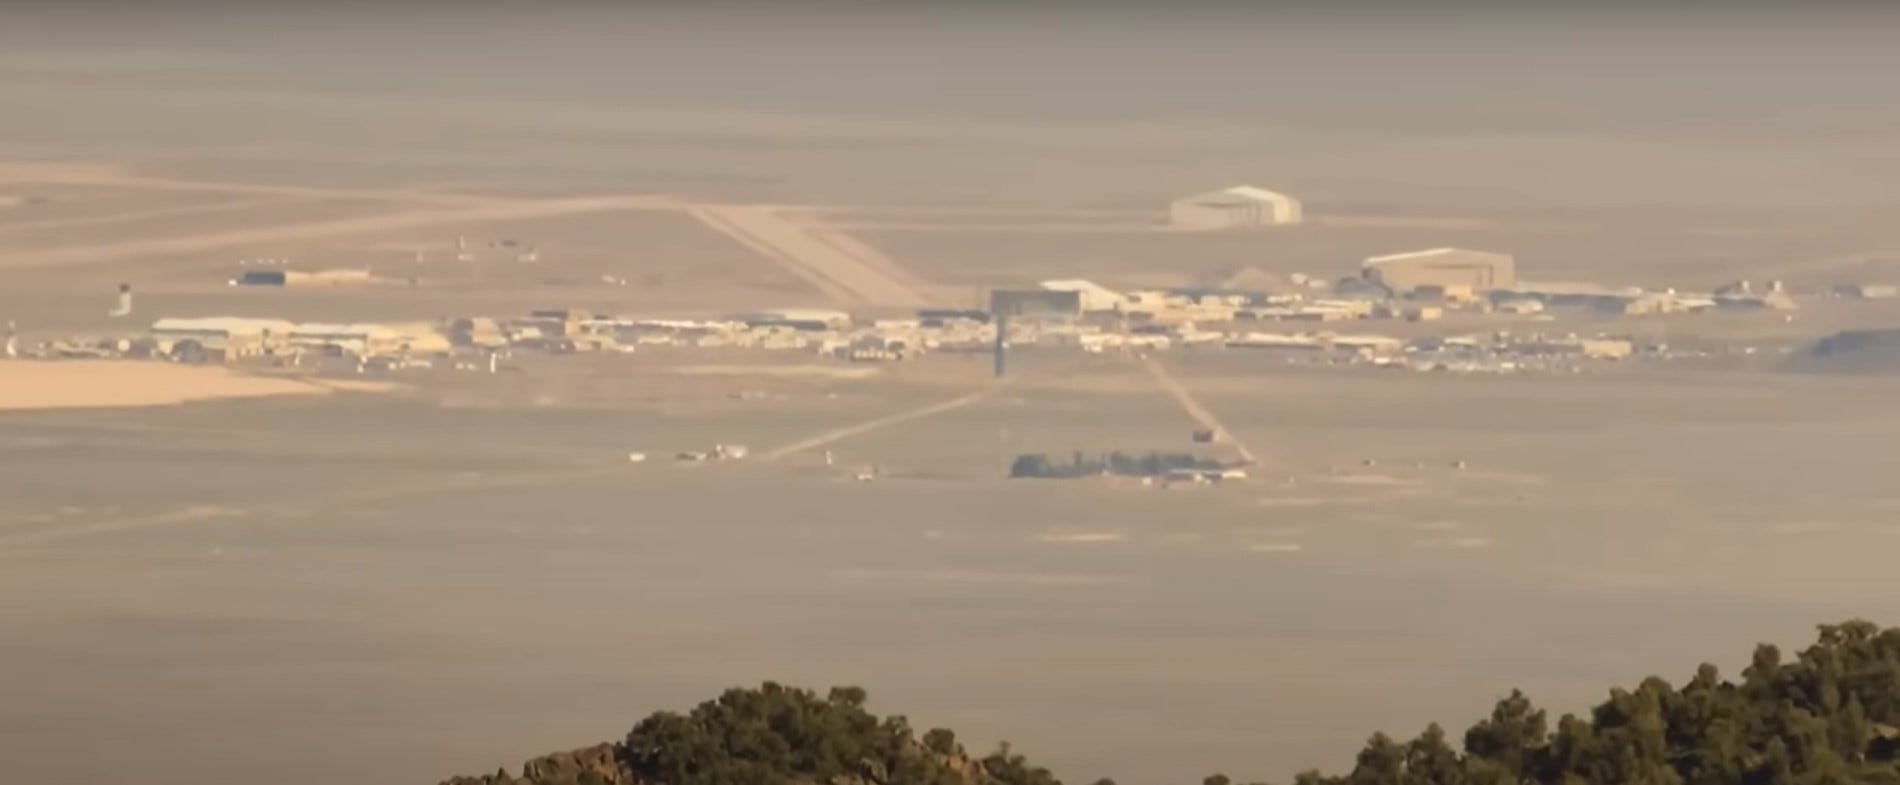 Inside the Mysterious Realm of Area 51